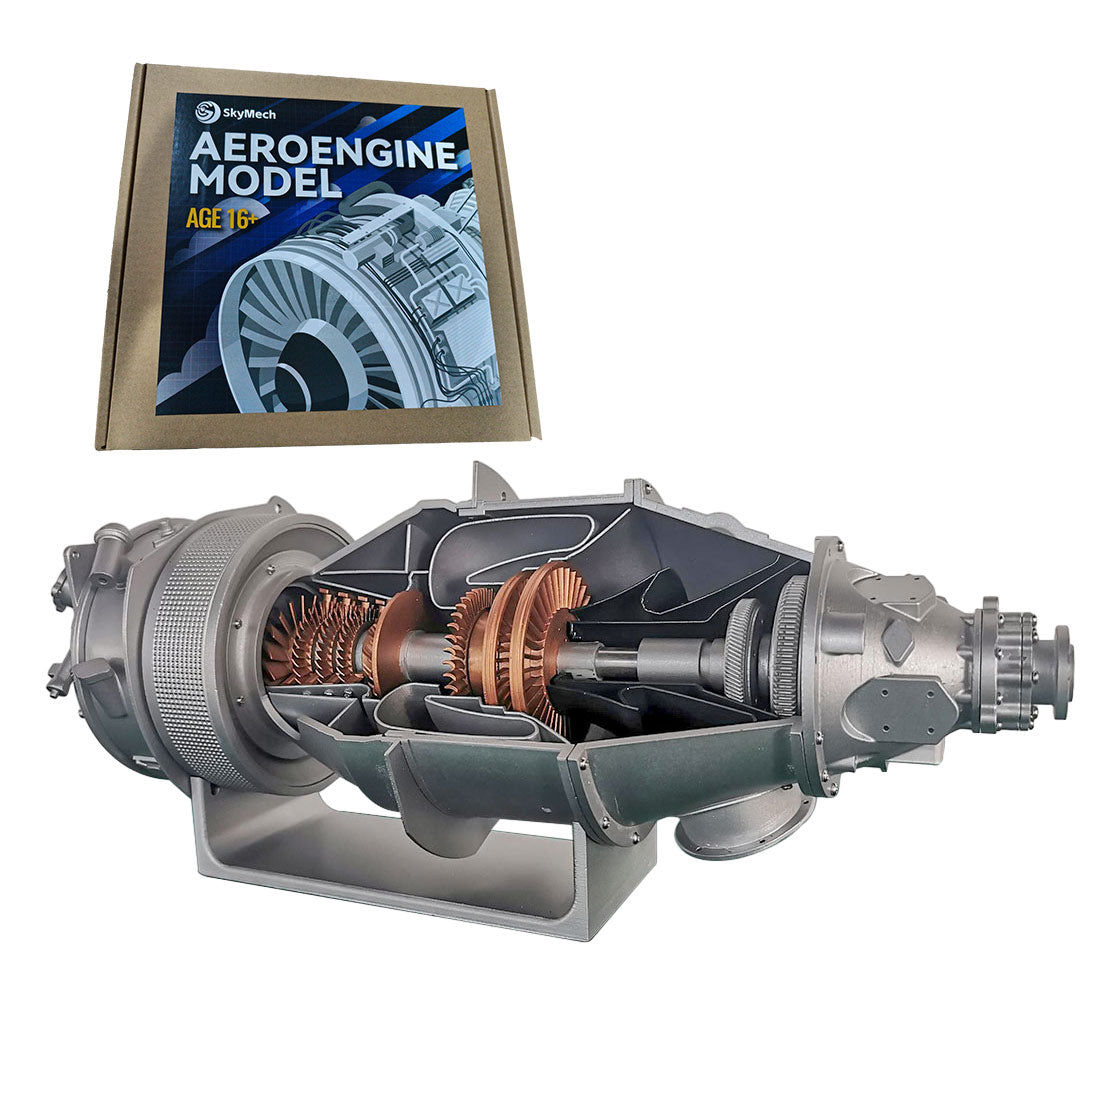 SKYMECHMAN PT6A Turboprop Engine Model Kit that Works - Build Your Own Turboprop Engine